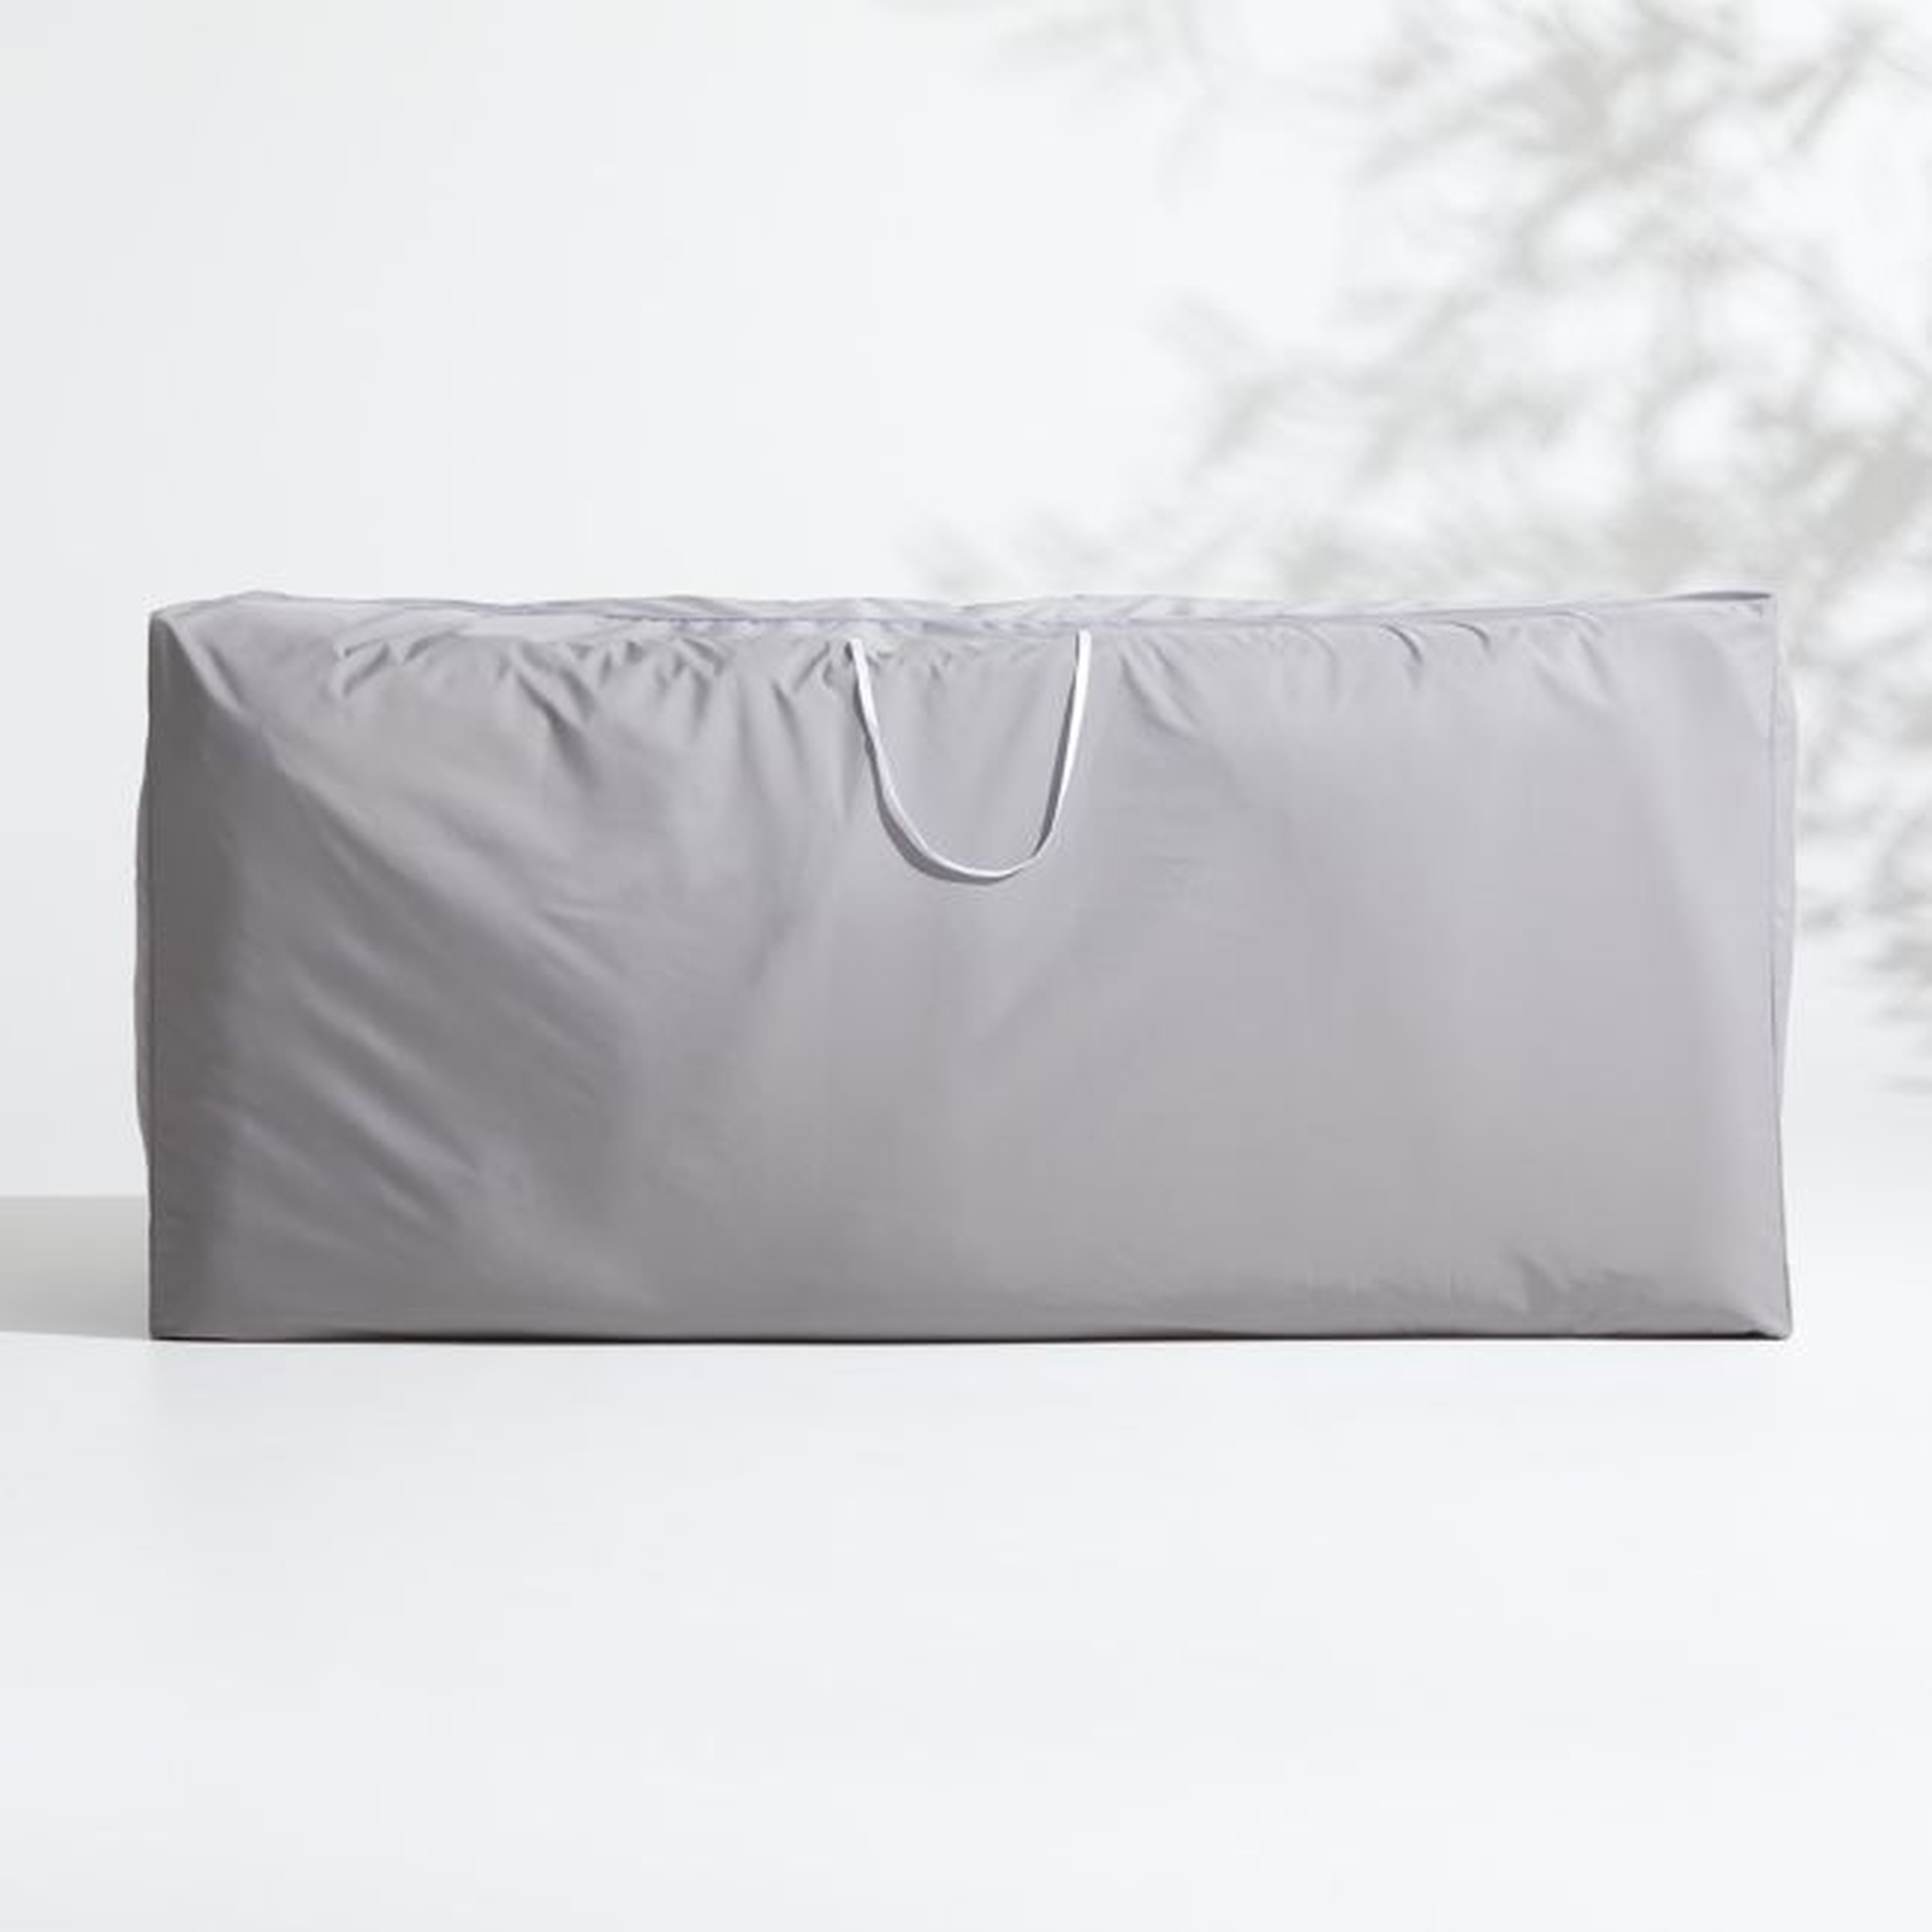 WeatherMAX Large Outdoor Cushion Storage Bag by KoverRoos - Crate and Barrel